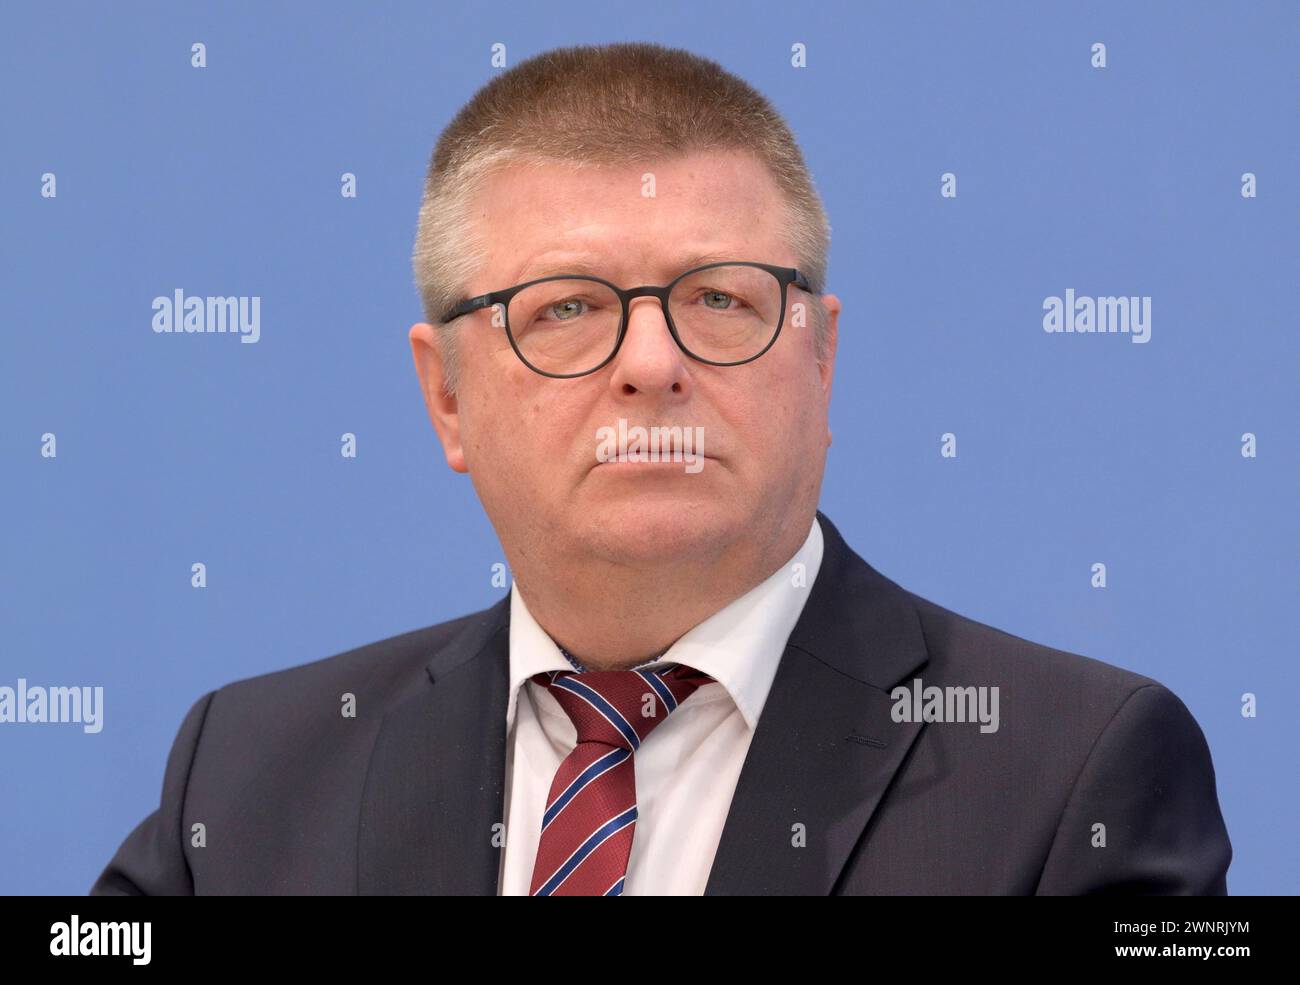 Thomas HALDENWANG , Praesident vom Bundesamt fuer Verfassungsschutz , 13.02.2024 Thomas HALDENWANG , President of the Federal Authority for the Protection of the Constitution of Germany , 13.02.2024 *** Thomas HALDENWANG , President of the Federal Authority for the Protection of the Constitution of Germany , 13 02 2024 Thomas HALDENWANG , President of the Federal Authority for the Protection of the Constitution of Germany , 13 02 2024 Stock Photo